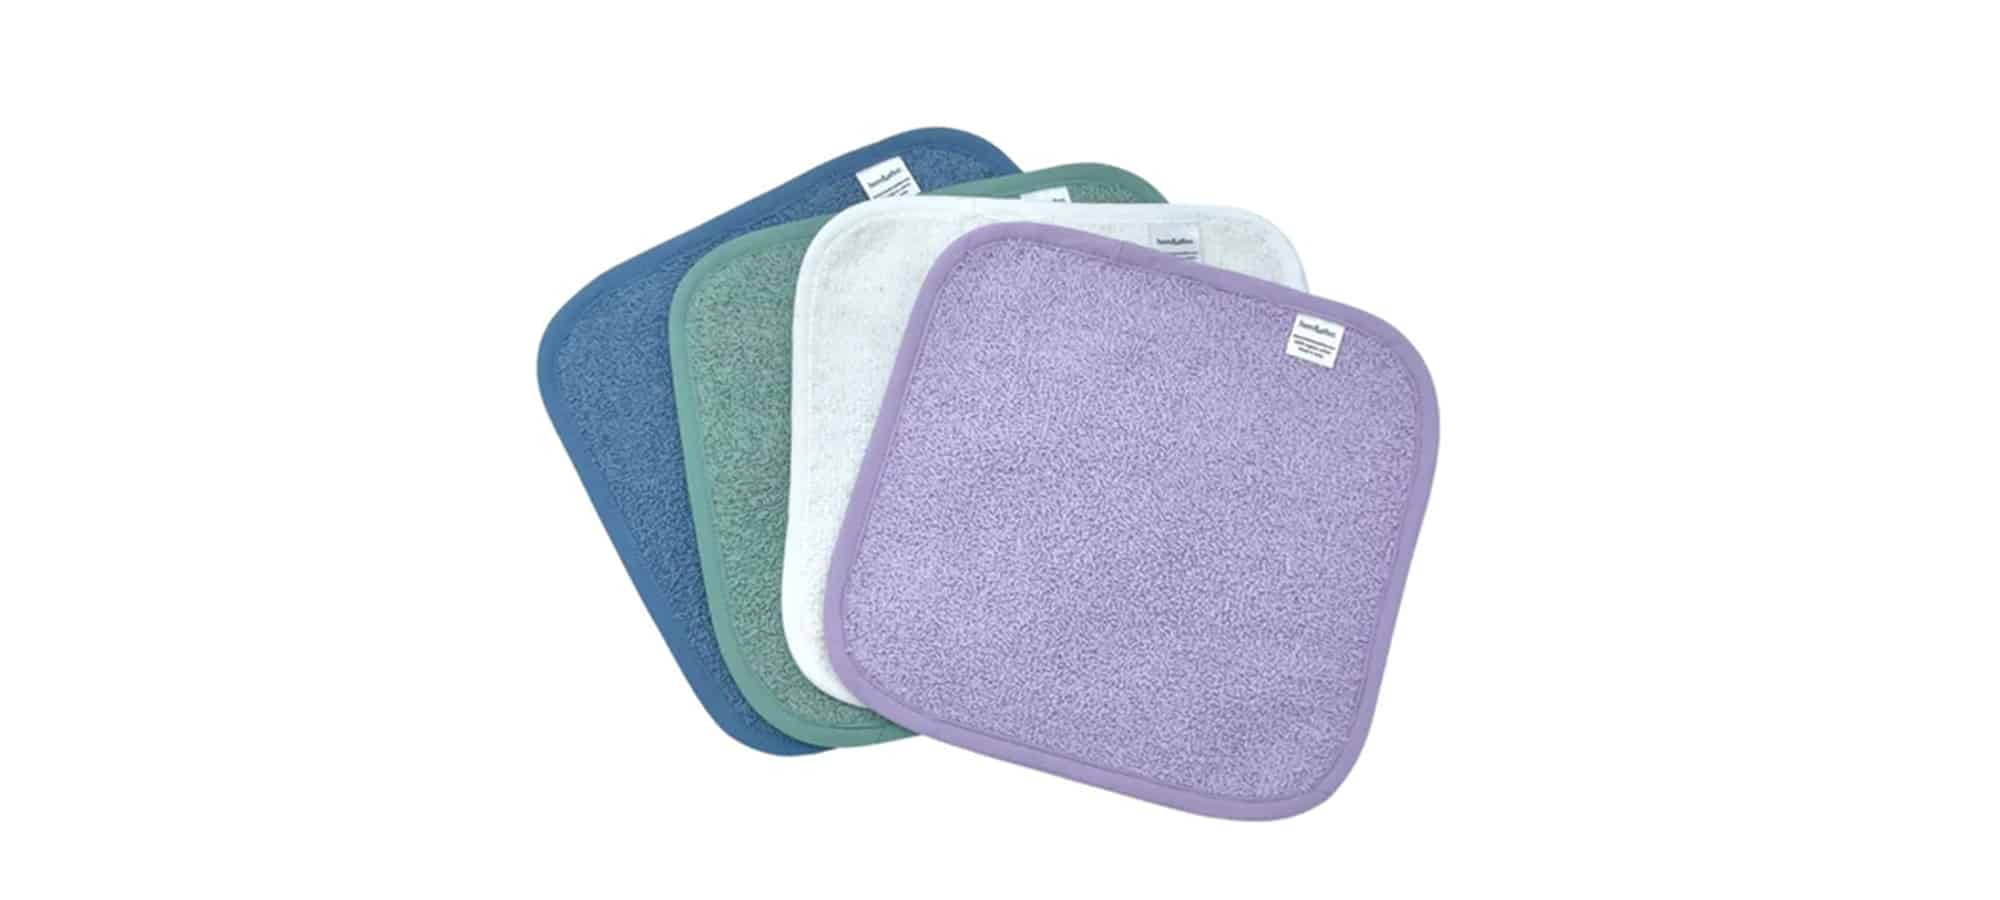 WIN a Pack of Reusable Cloth Wipes